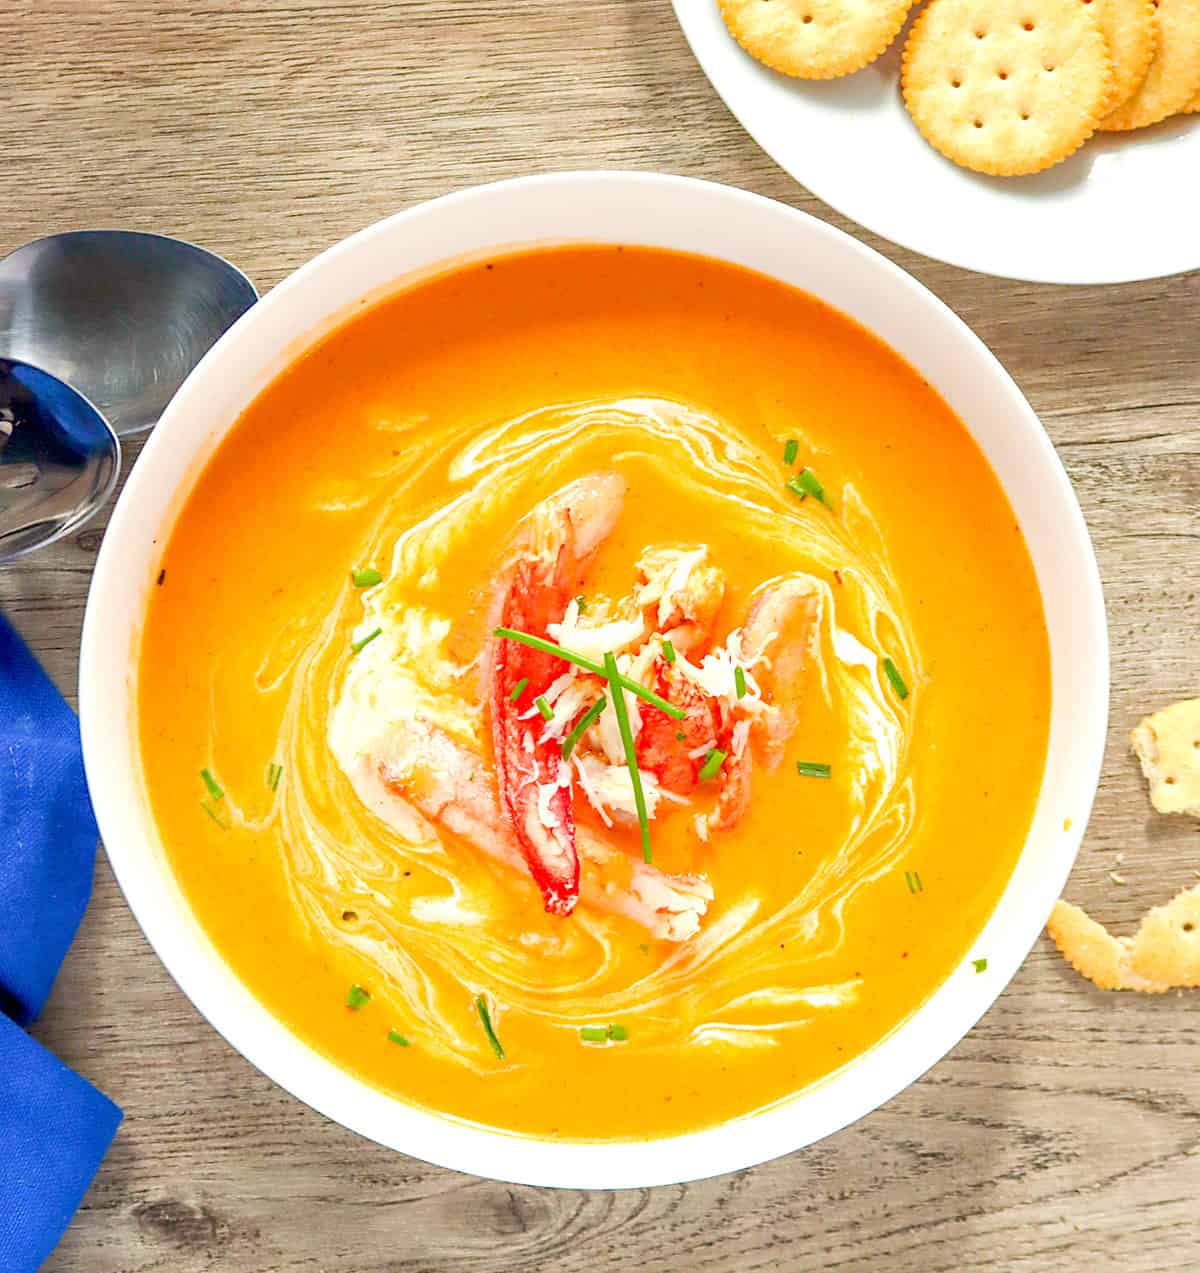 Crab bisque with crackers for an elegant dinner entree